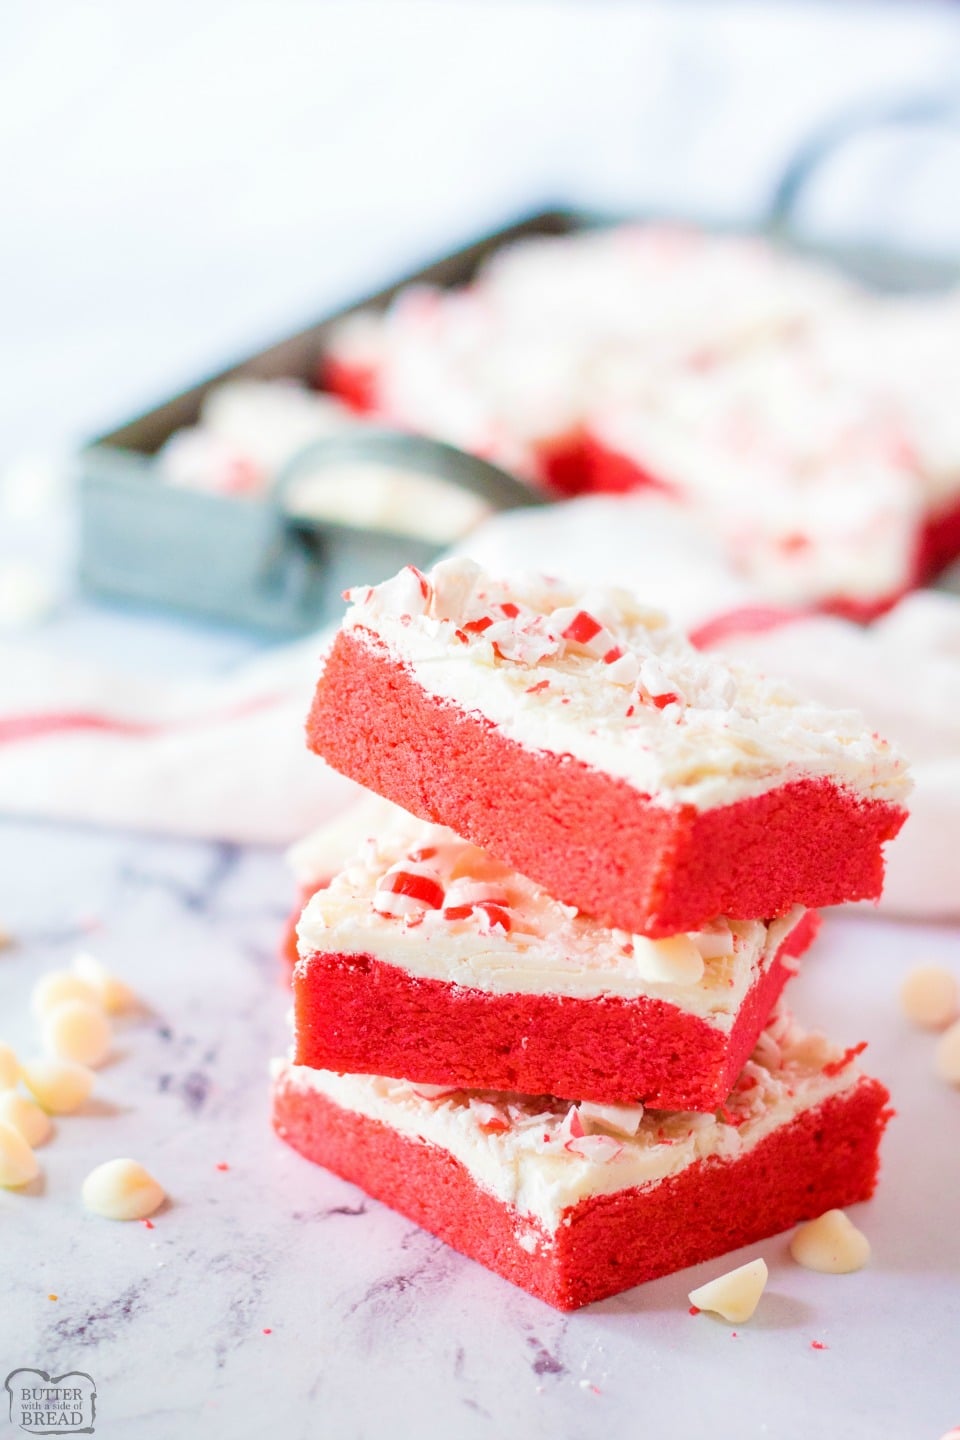 Frosted Peppermint Cookie Bars are festive holiday sugar cookies baked into bars & topped with sweet white chocolate & peppermints! Easy cookie bar recipe with lovely peppermint flavor perfect for Christmas baking. 